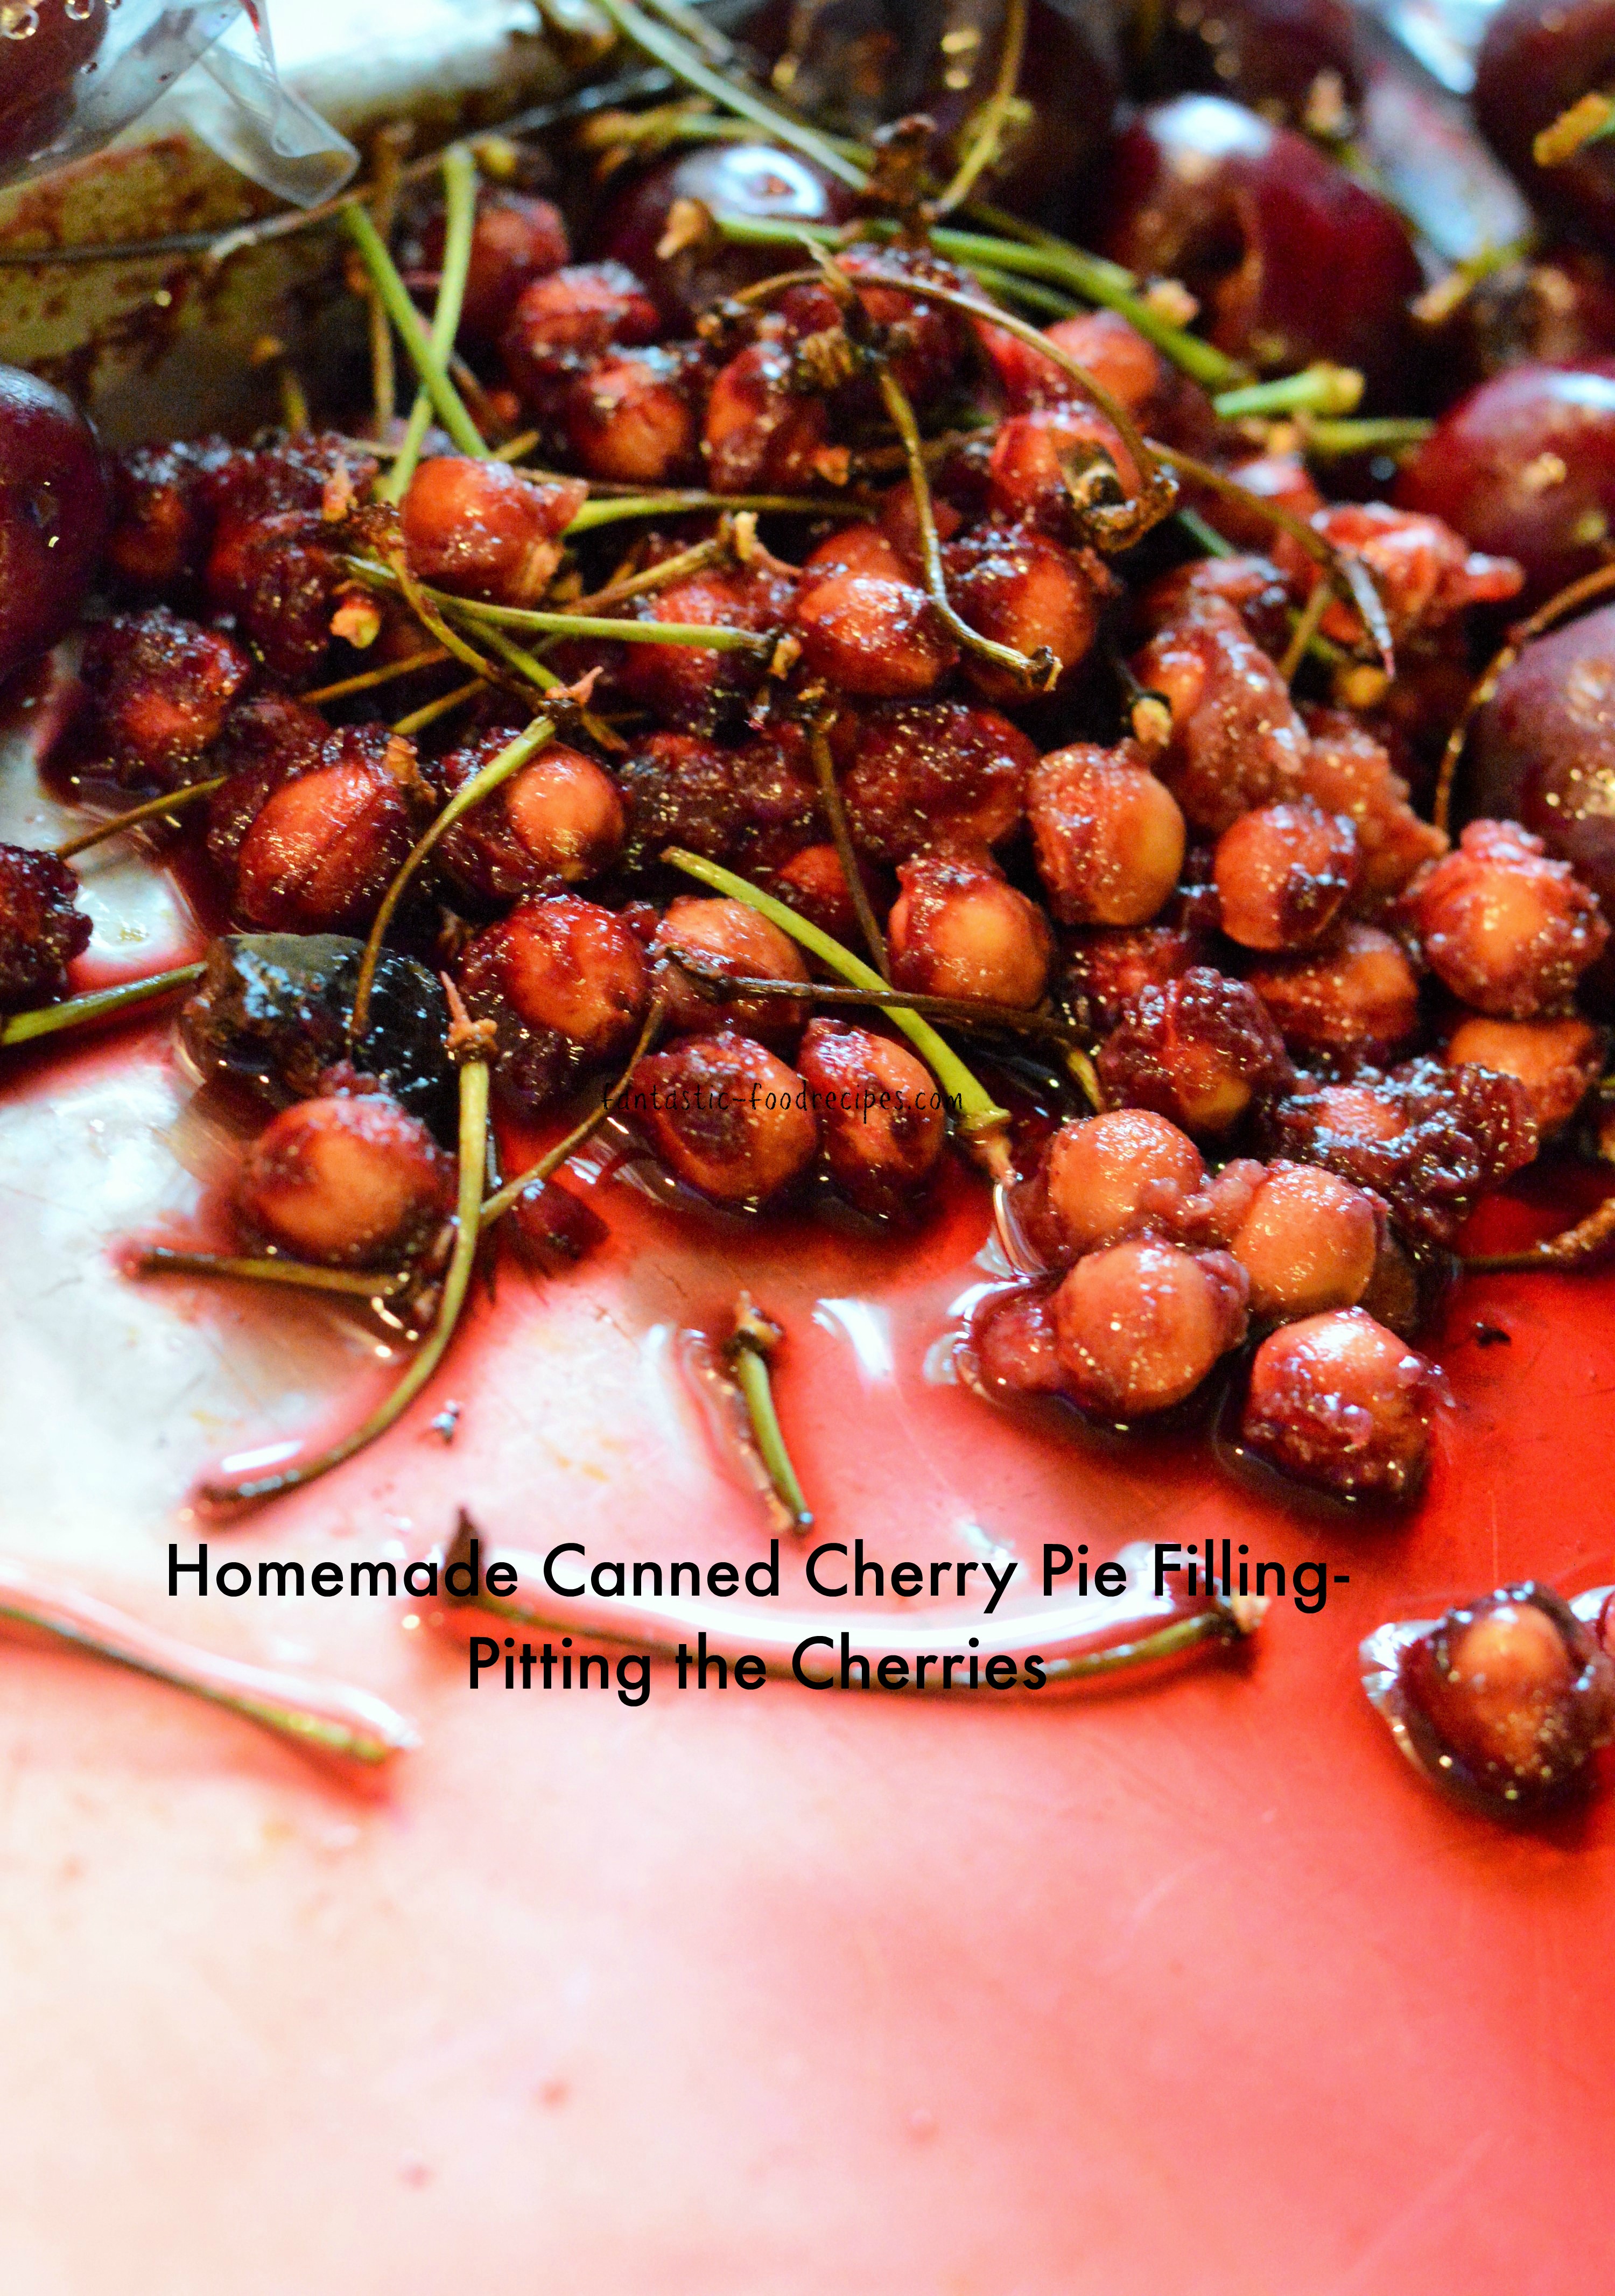 Homemade Canned Cherry Pie Filling- Pitting the Cherries ...